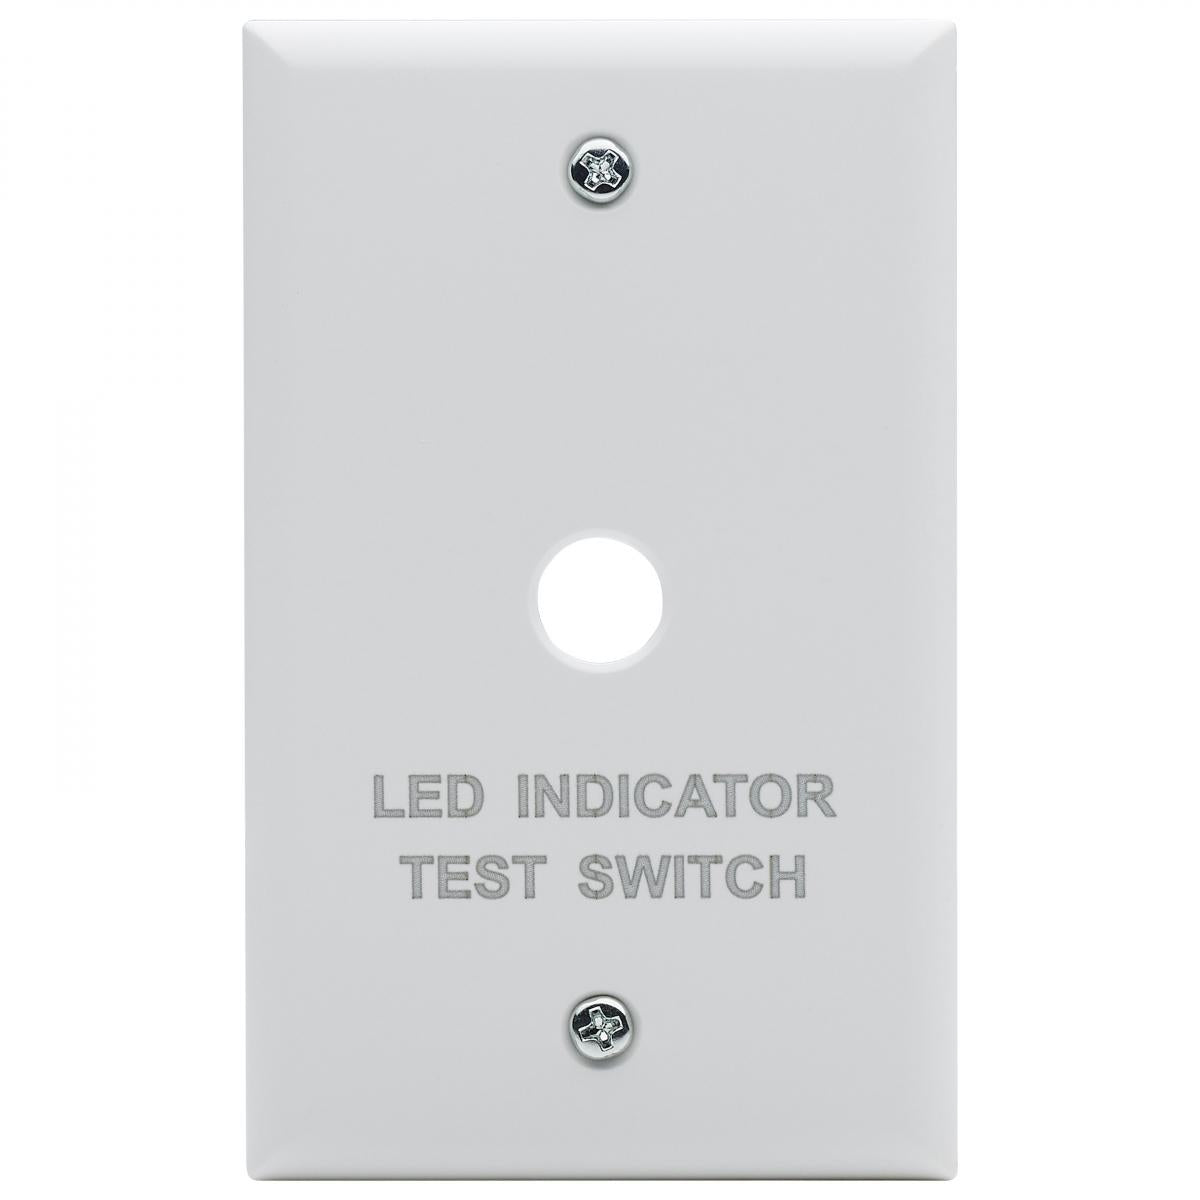 Emergency Remote Test Switch, Single Gang Plate, White Finish